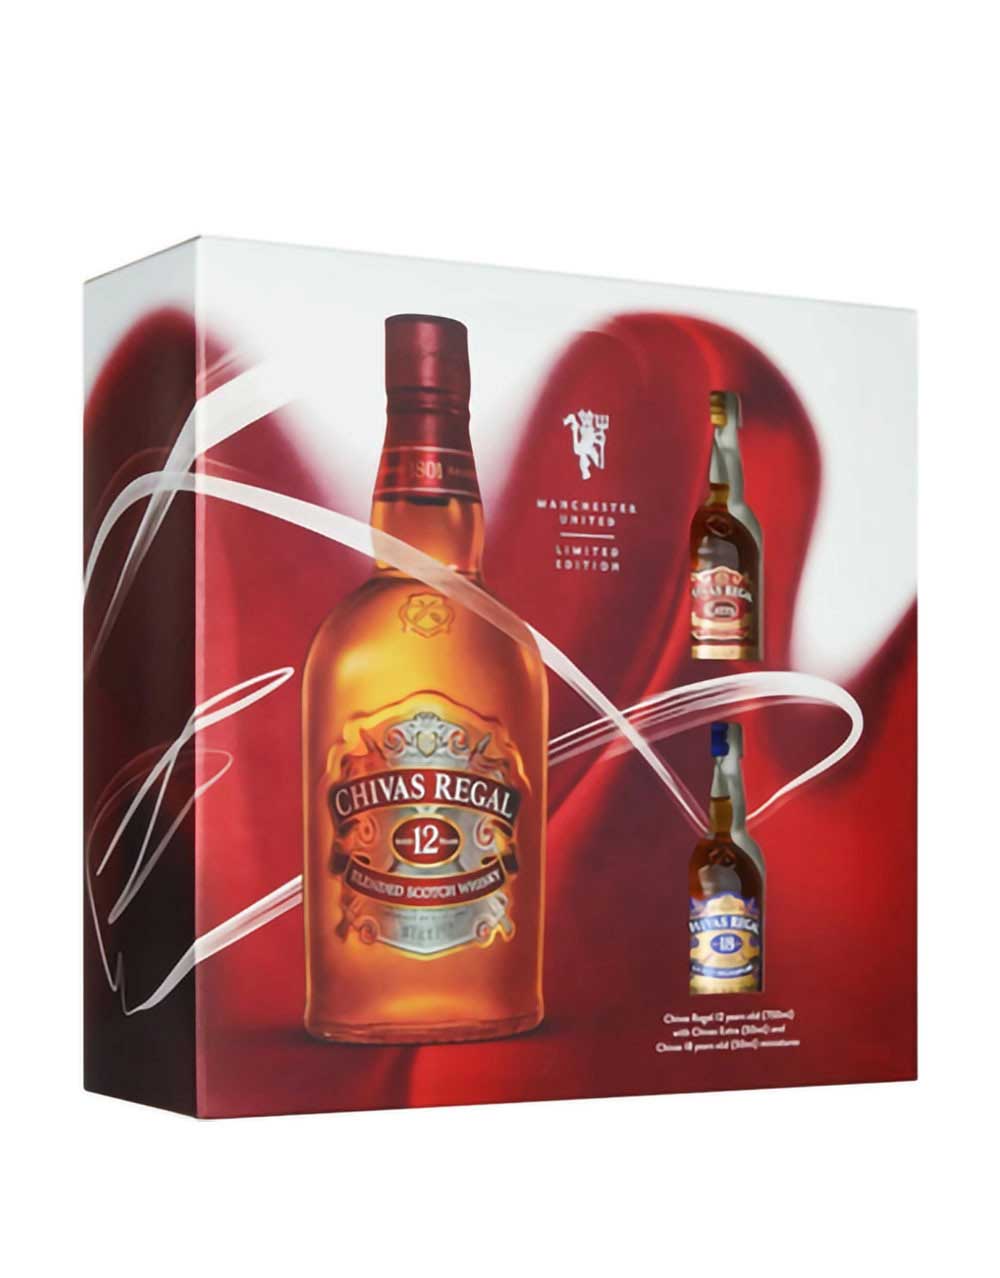 Chivas Regal Blended Scotch Whisky 12 Year Old 750mL, 80 Proof 